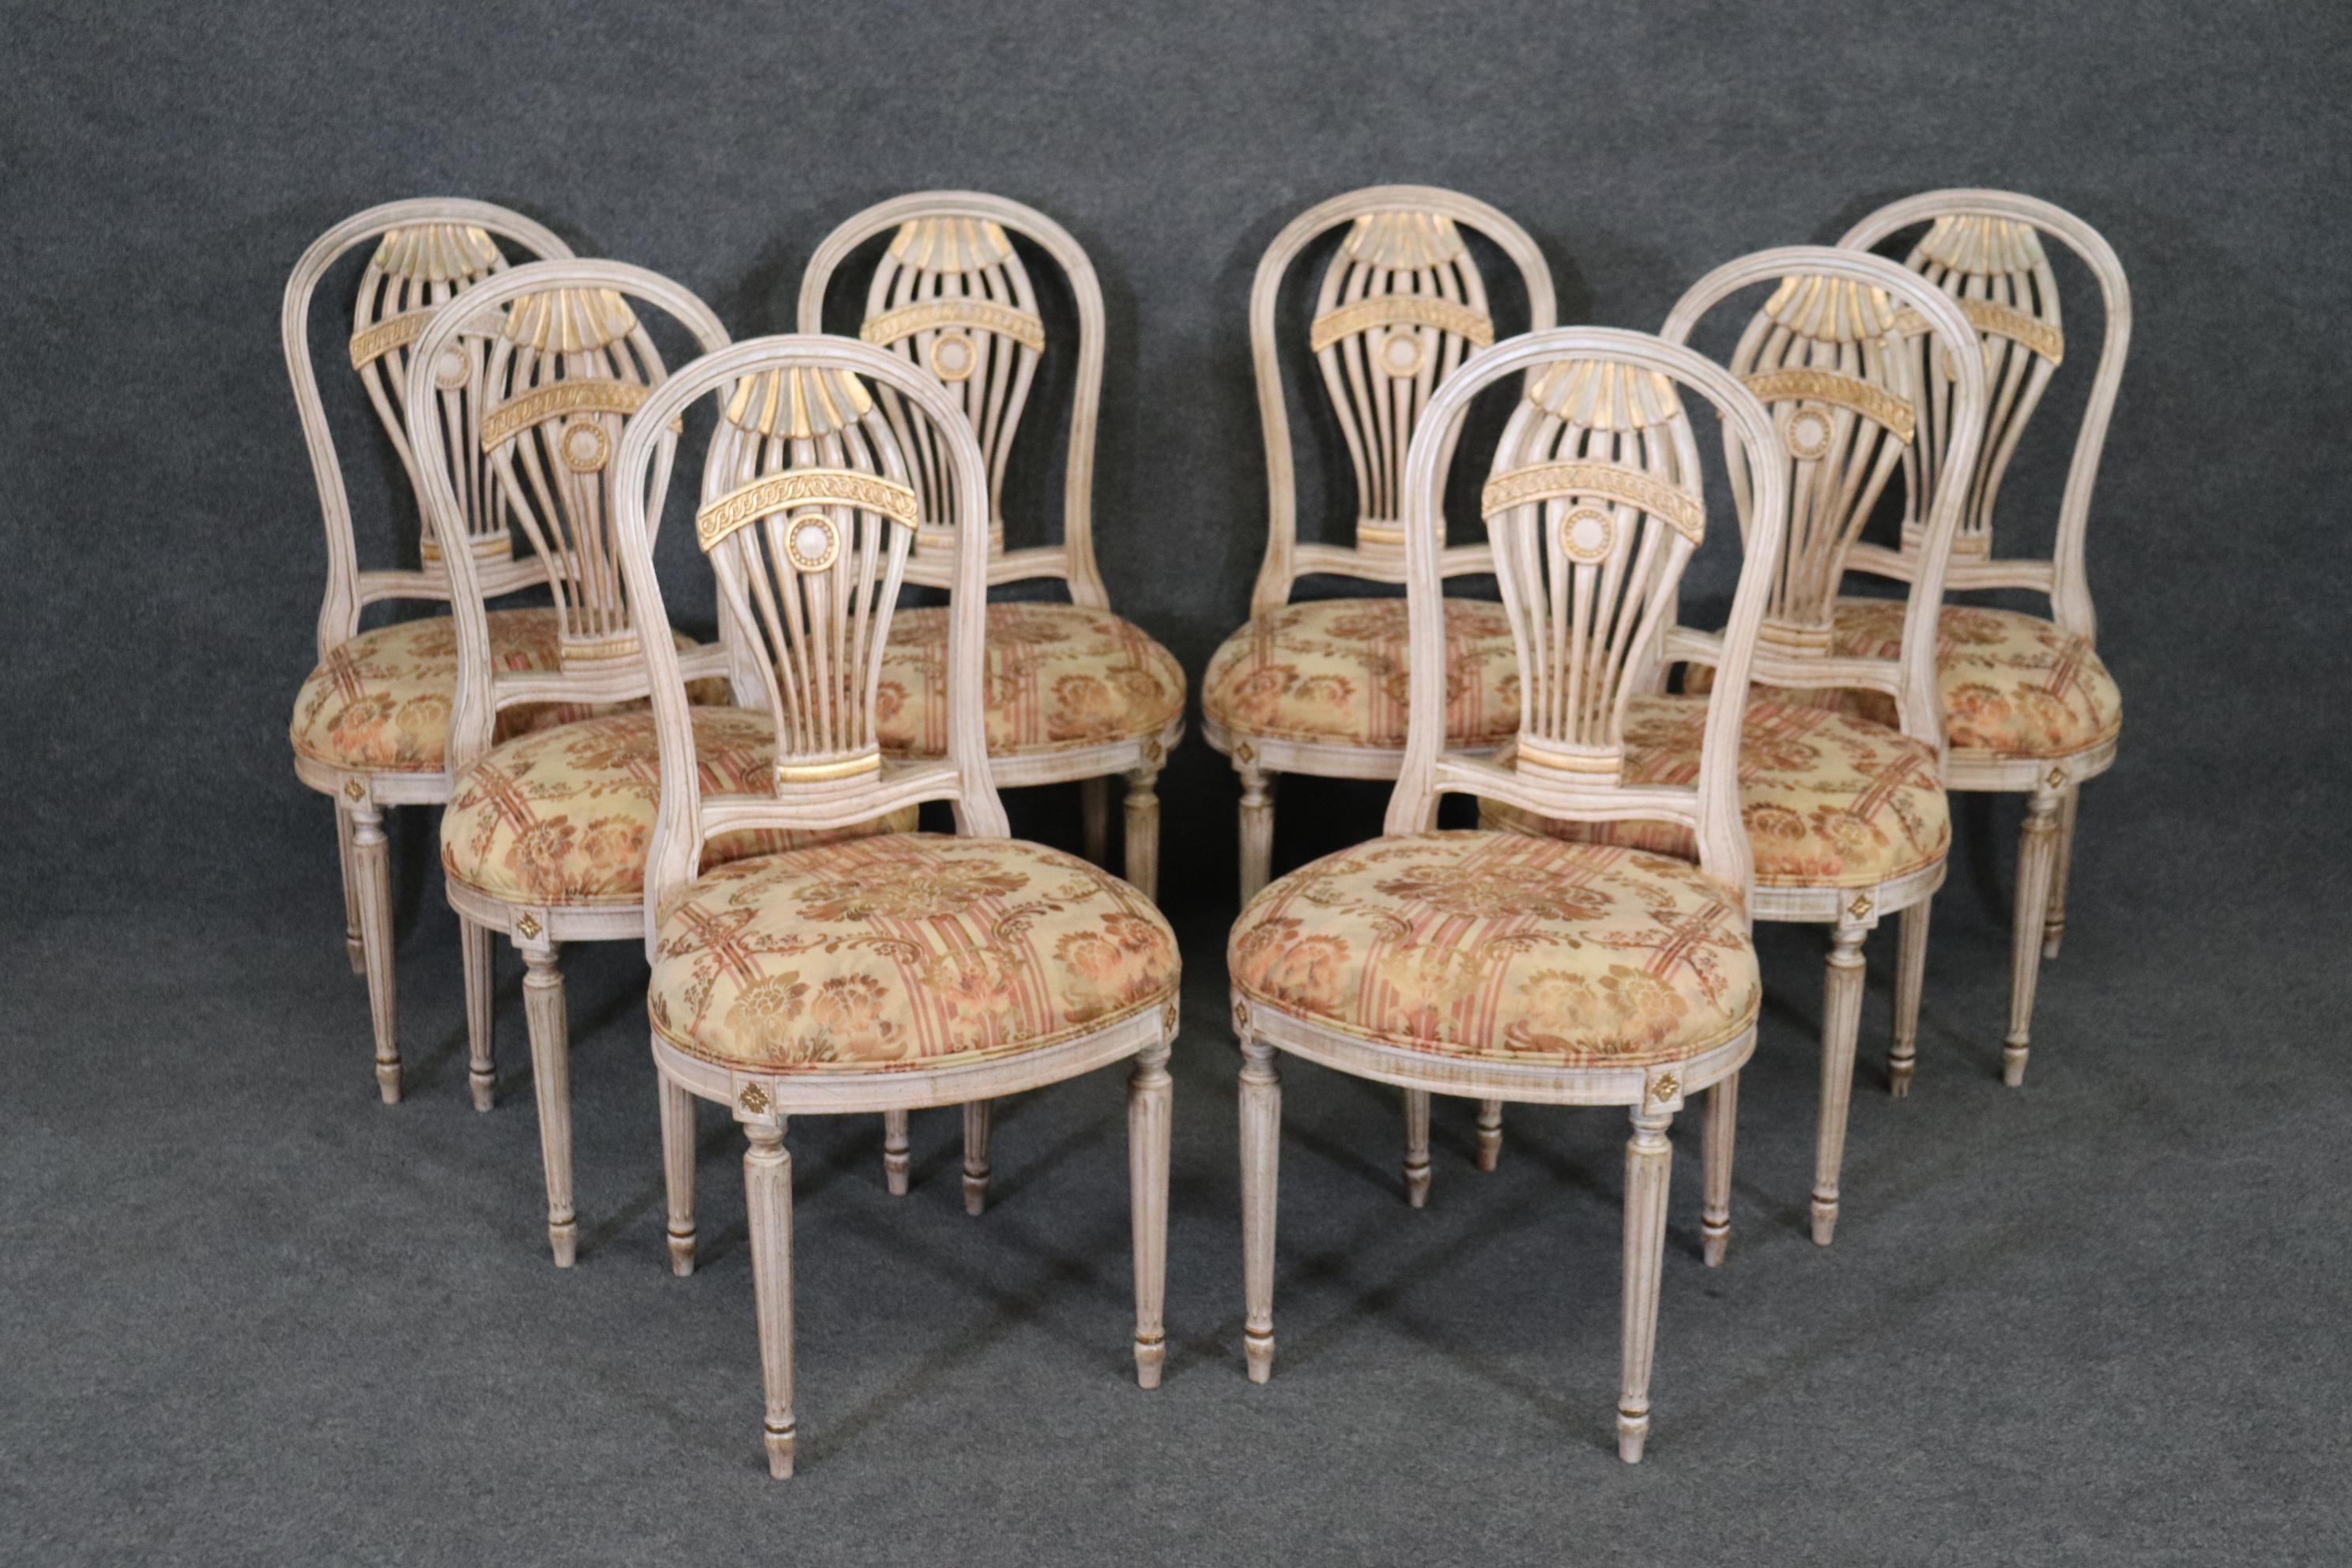 This set of 8 French Directoire Style balloon dining Rroom chairs are made with immense detail and of the highest quality! If you look at the photos provided you'll see the elaborate carved decorations as well as the beautiful upholstery with floral